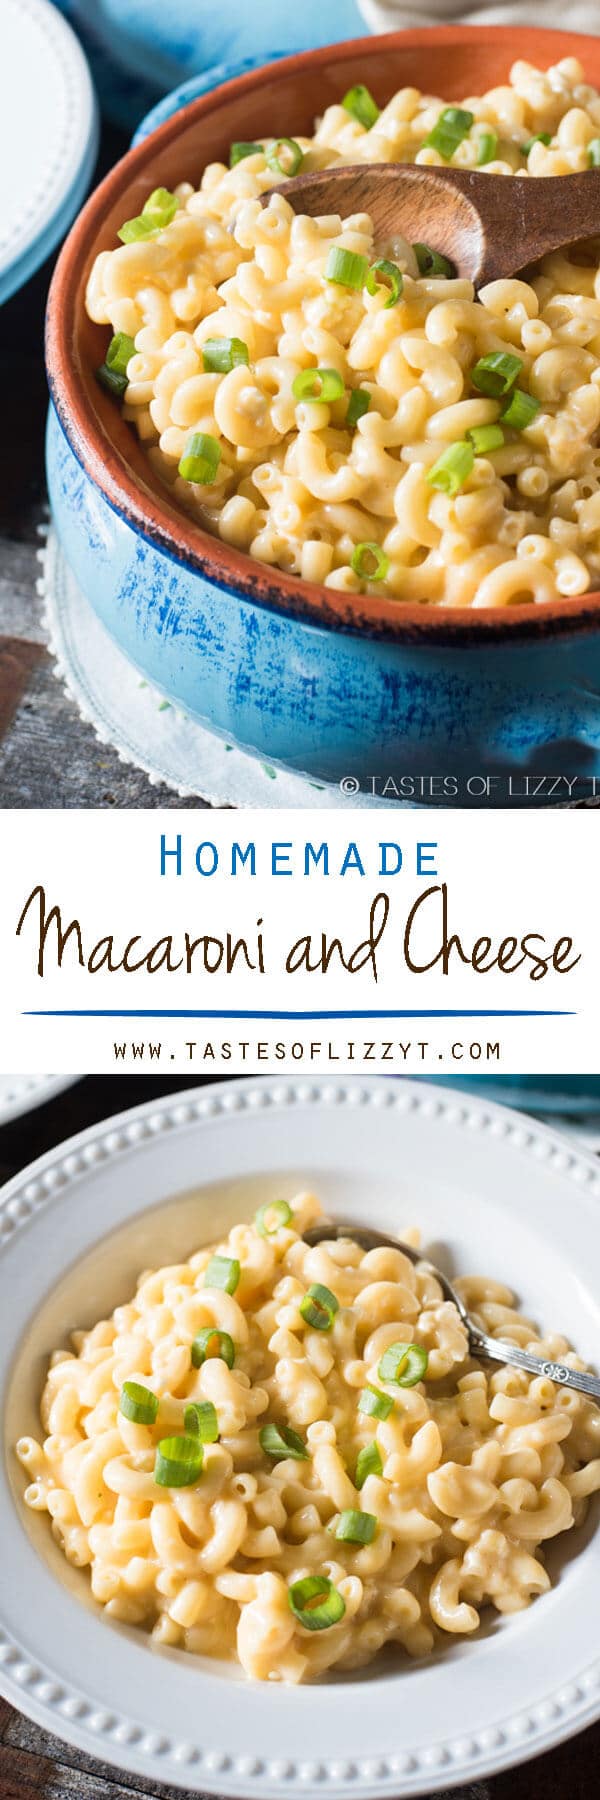 Homemade Macaroni and Cheese {Easy recipe with two cheeses}